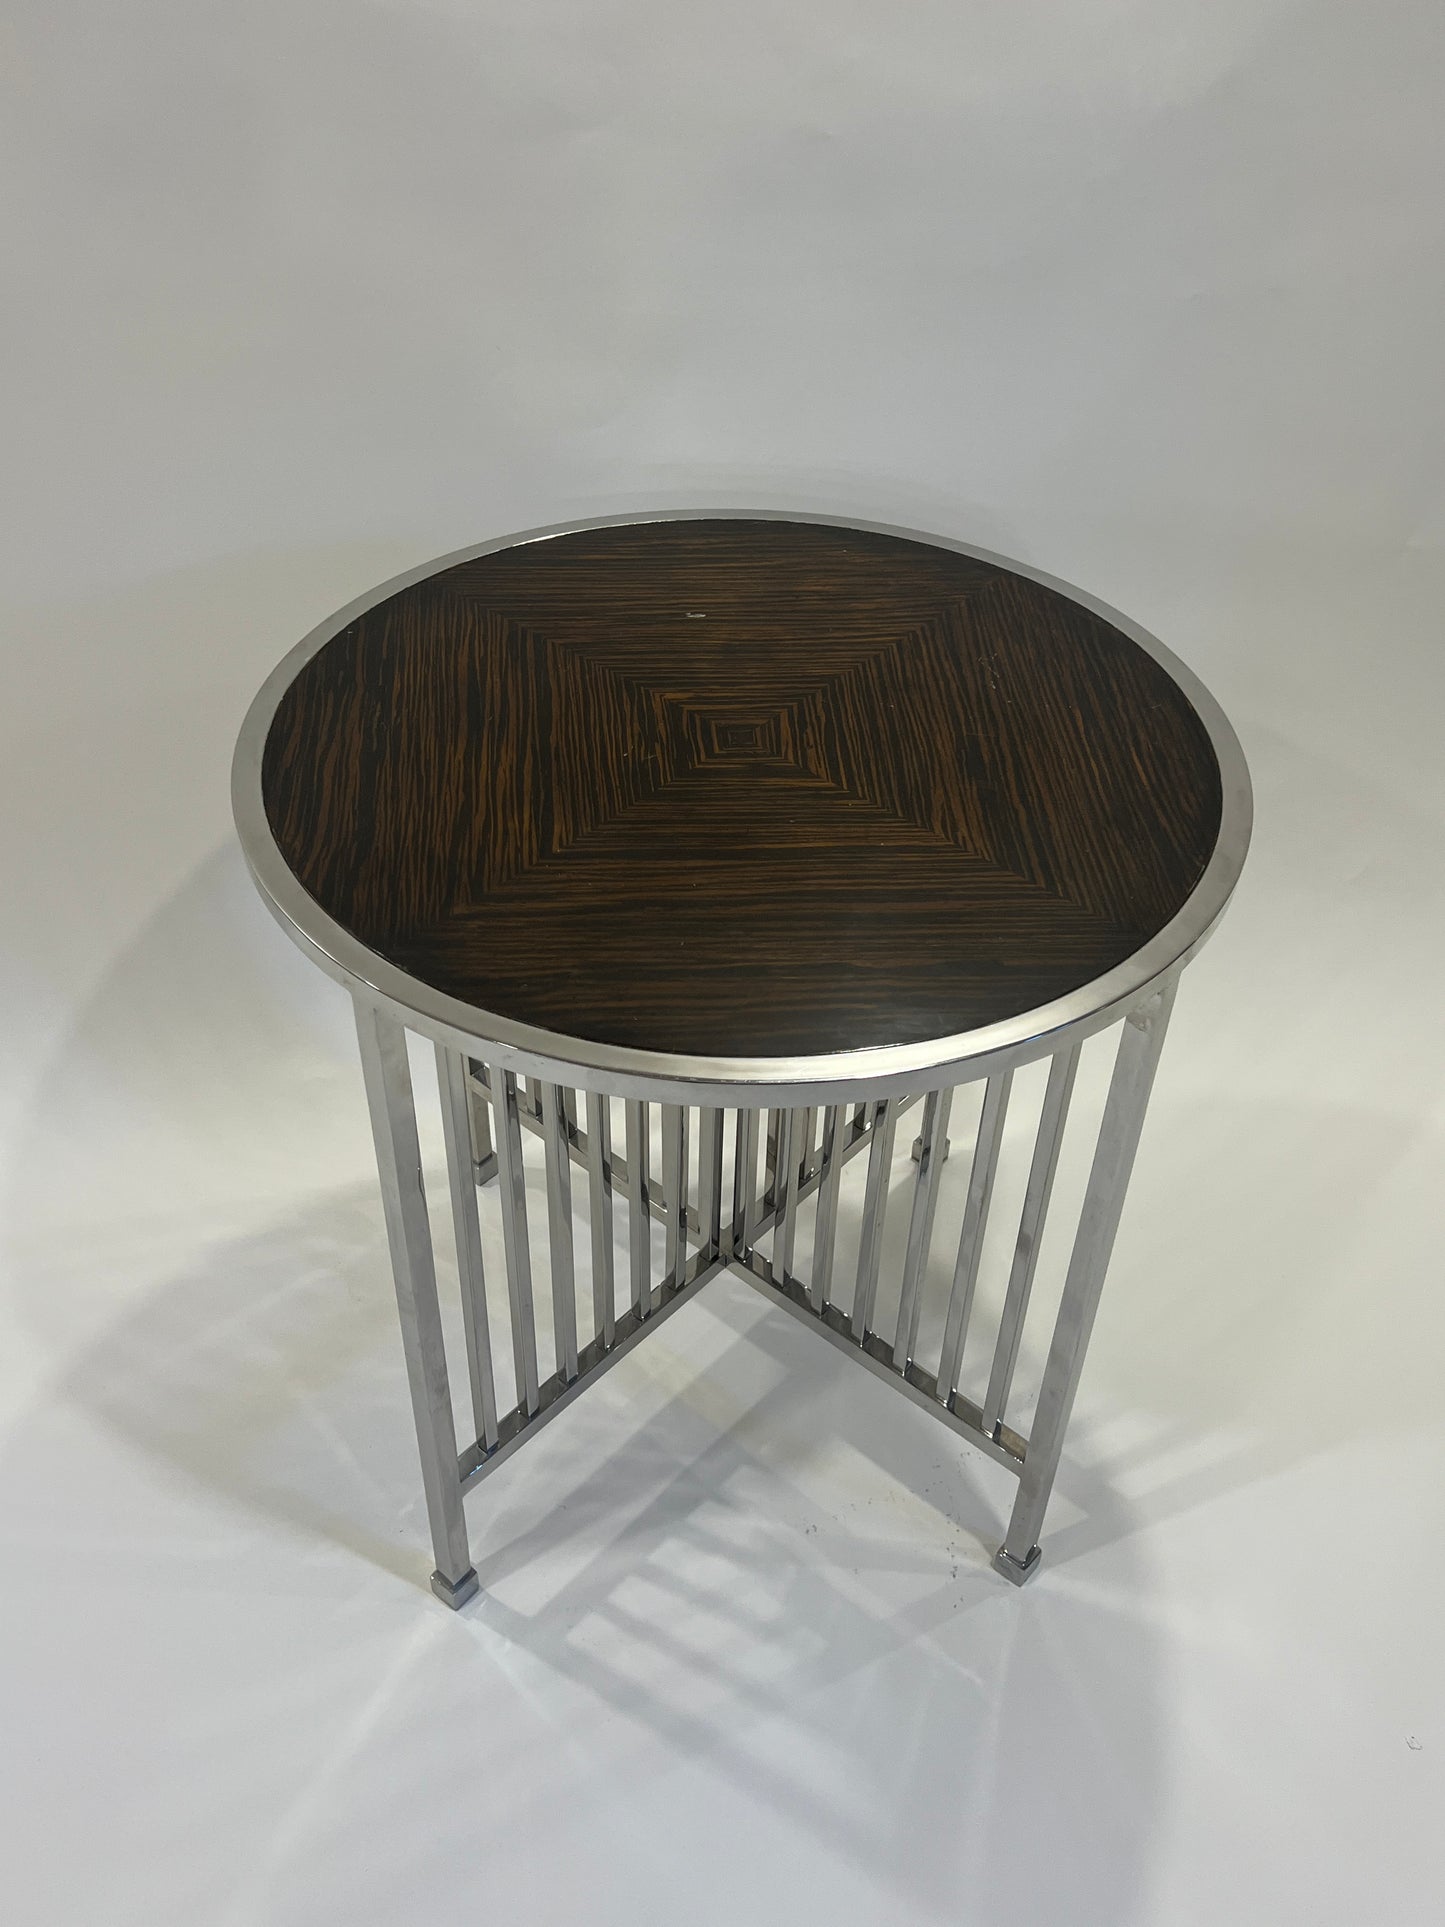 Rosewood table by Paul Maitland Smith